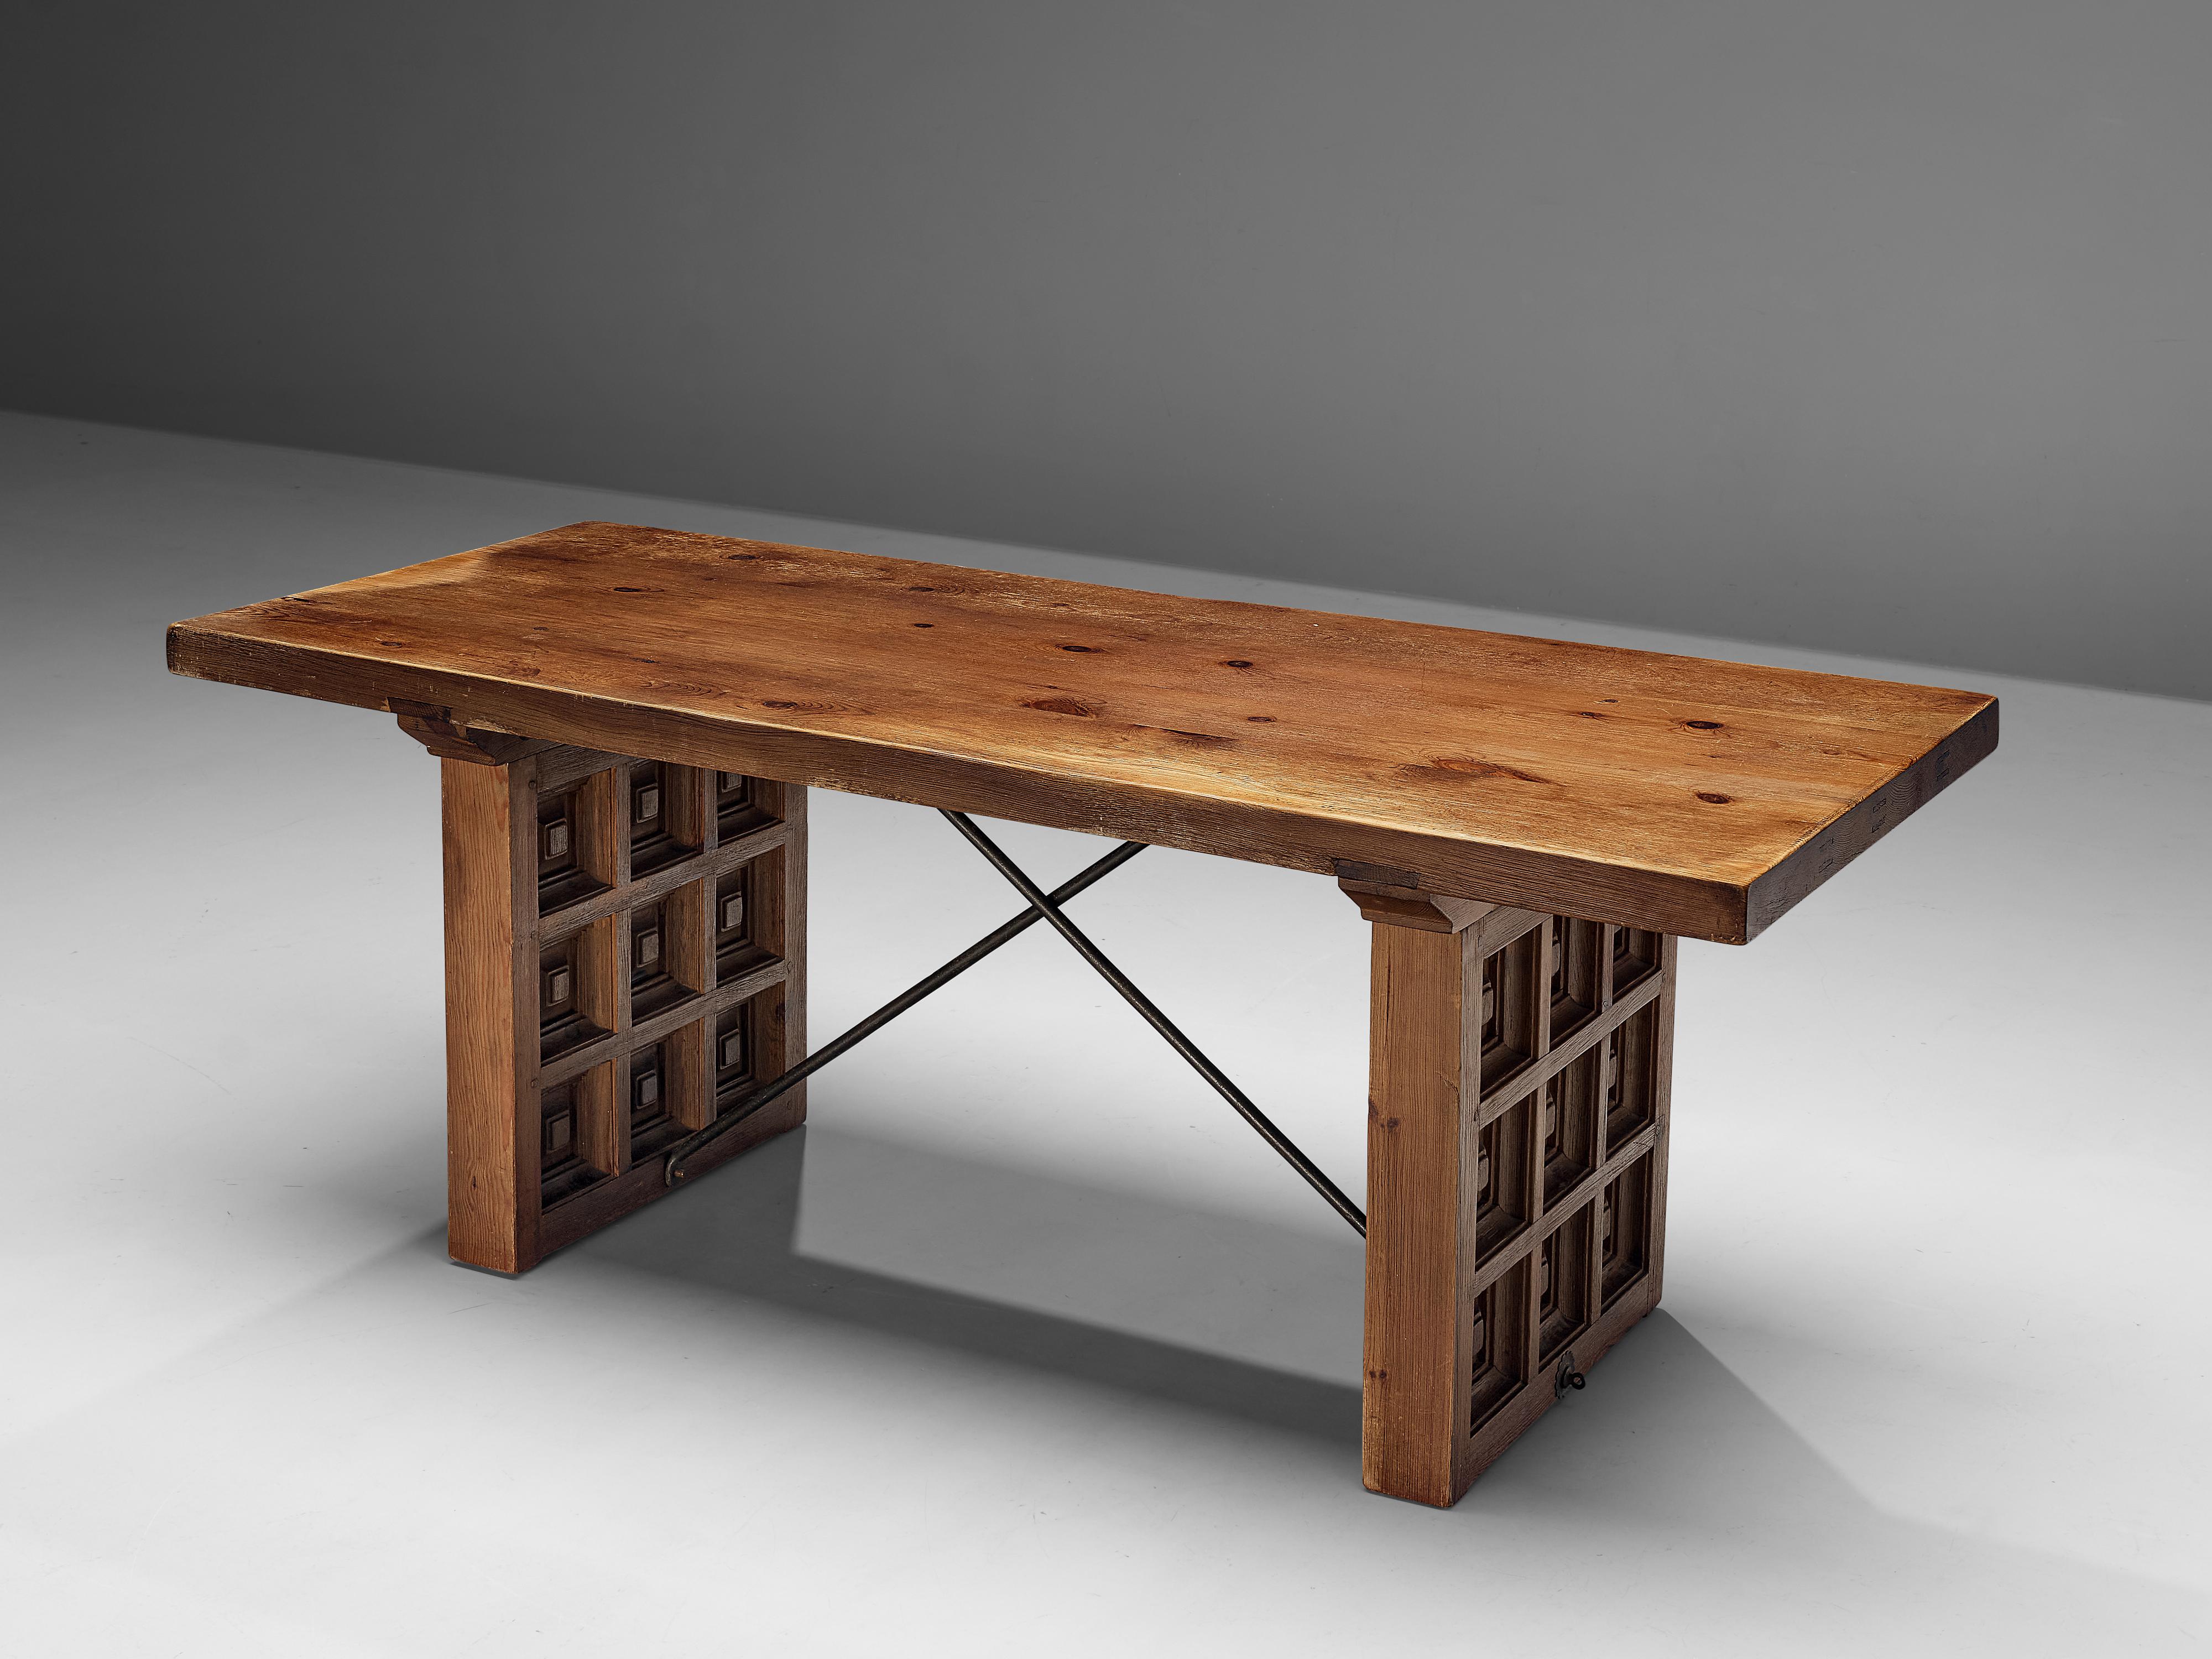 Biosca, dining table, stained pine, iron, Spain, 1960s

Outstanding Spanish dining table that is executed by Biosca in a architectural way. The tabletop features lovely wooden inlays and knots giving it a natural character. The two bases feature a